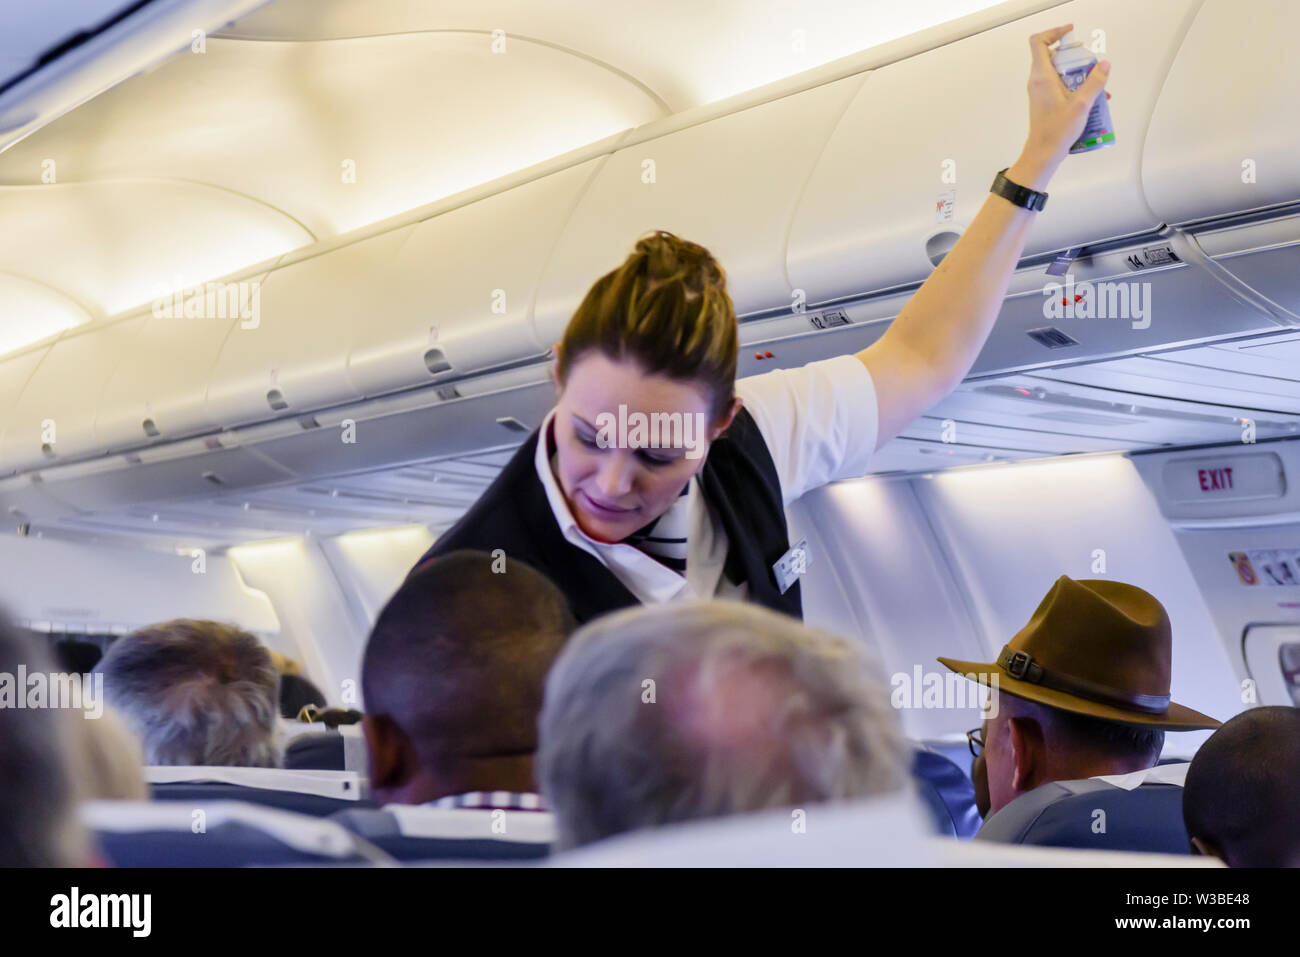 British Airways (operated by Comair) cabin crew sprays an insecticide inside the cabin before take-off as a precaution.  Namibia Stock Photo